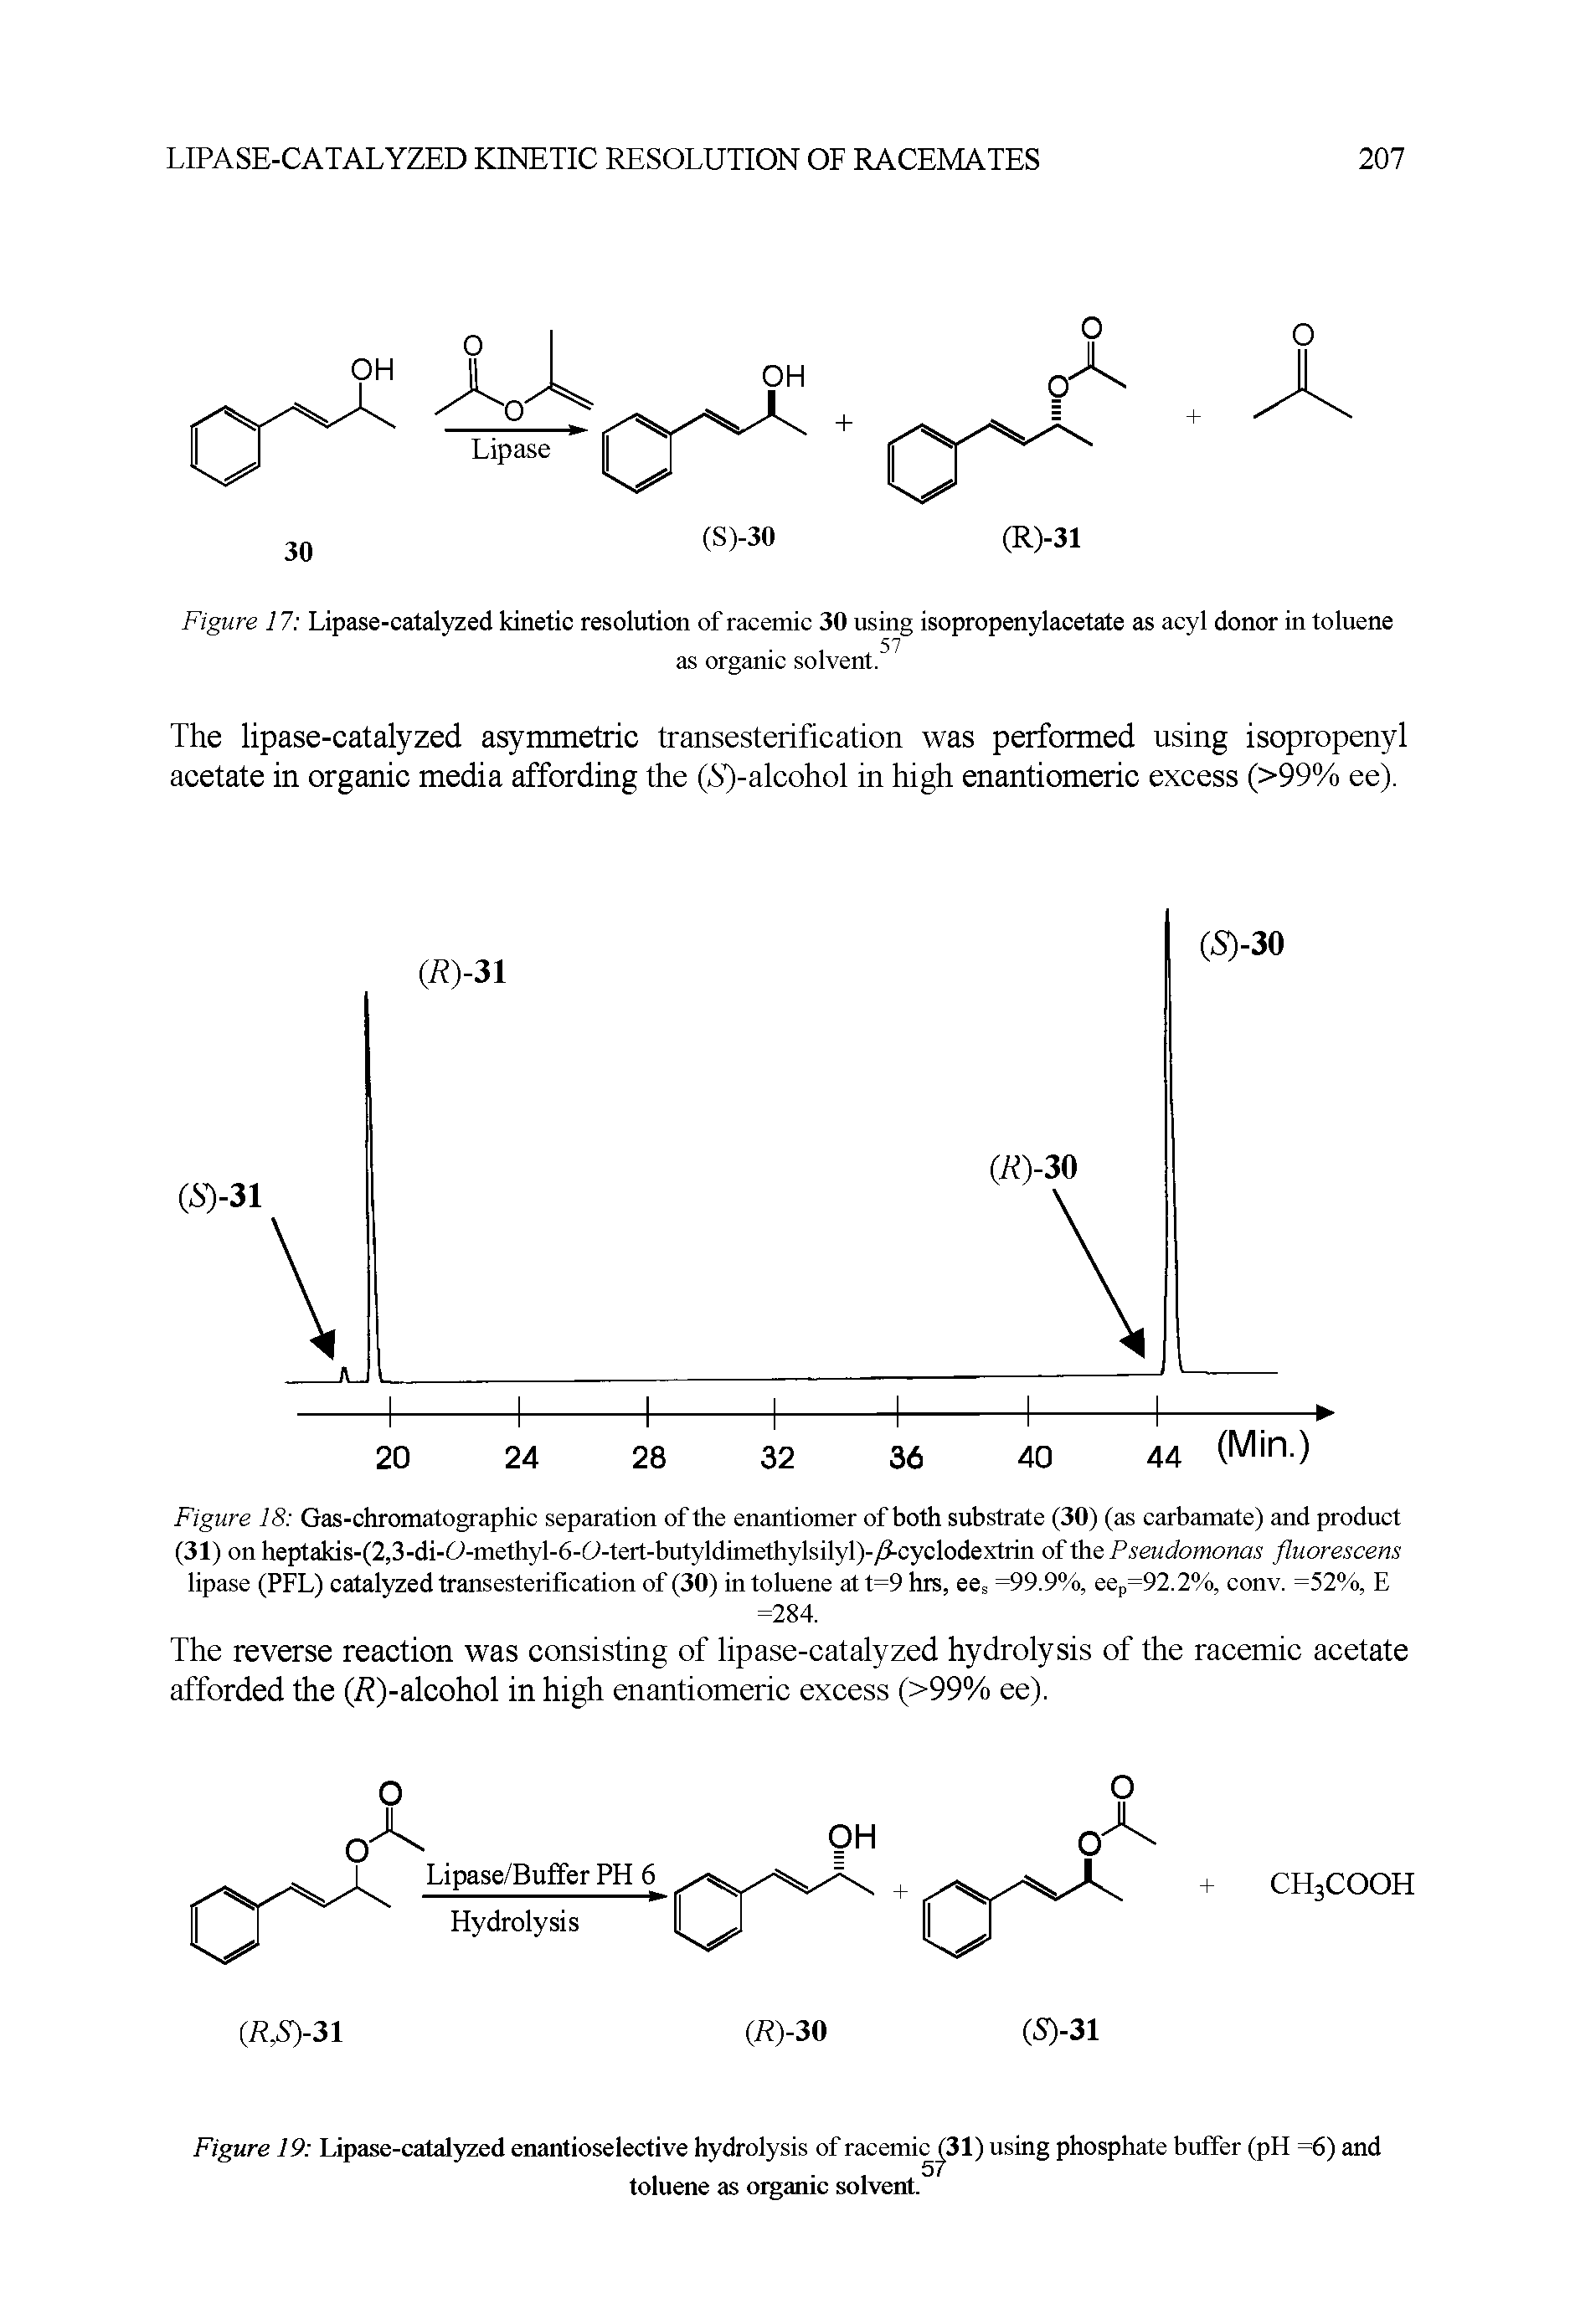 Figure 19 Lipase-catalyzed enantioselective hydrolysis of racemic 31) using phosphate buffer (pH =6) and...